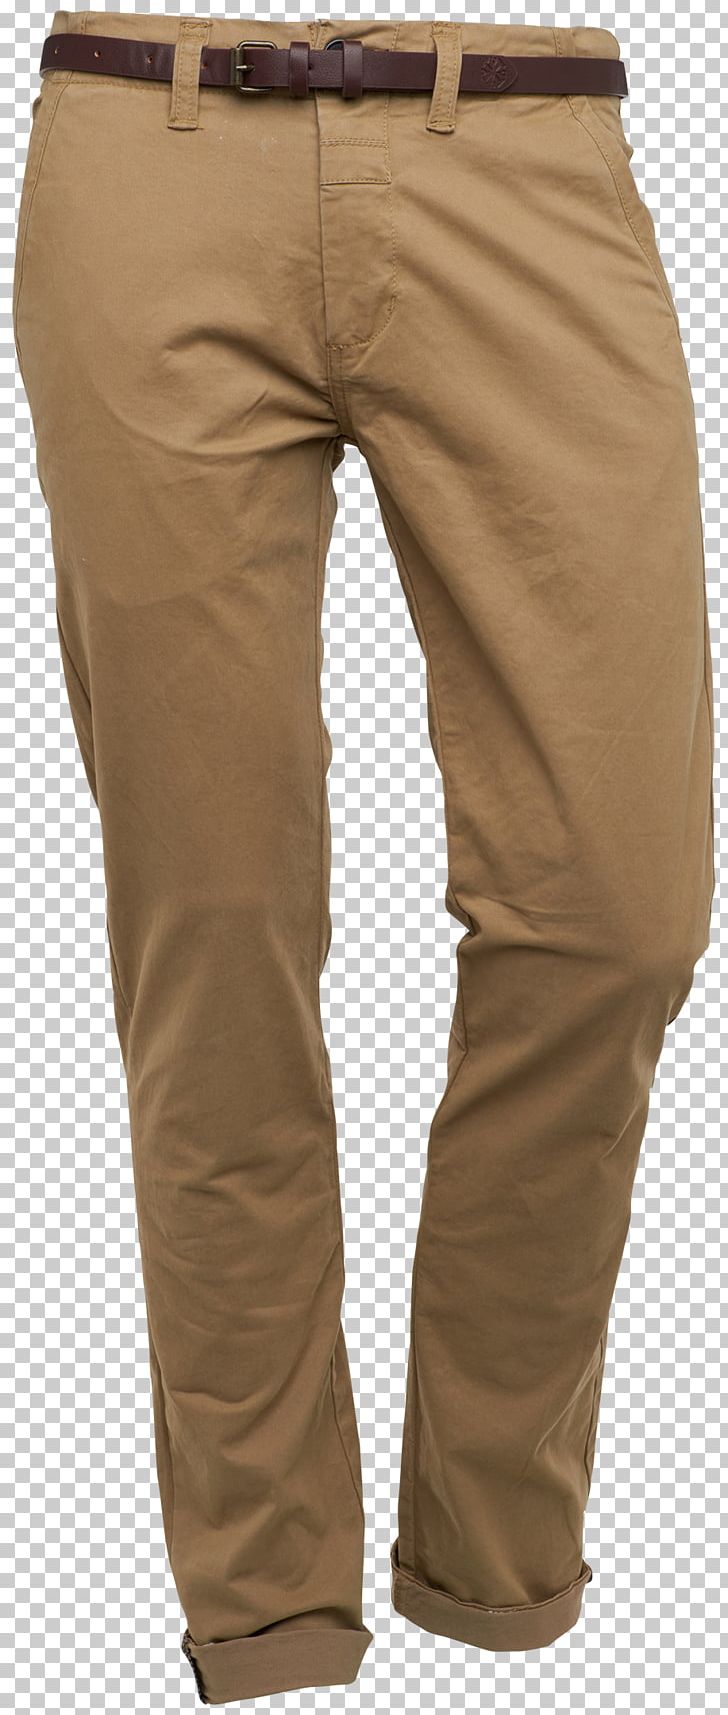 Khaki Jeans PNG, Clipart, Beige, Clothing, Jeans, Khaki, Trousers Free PNG Download